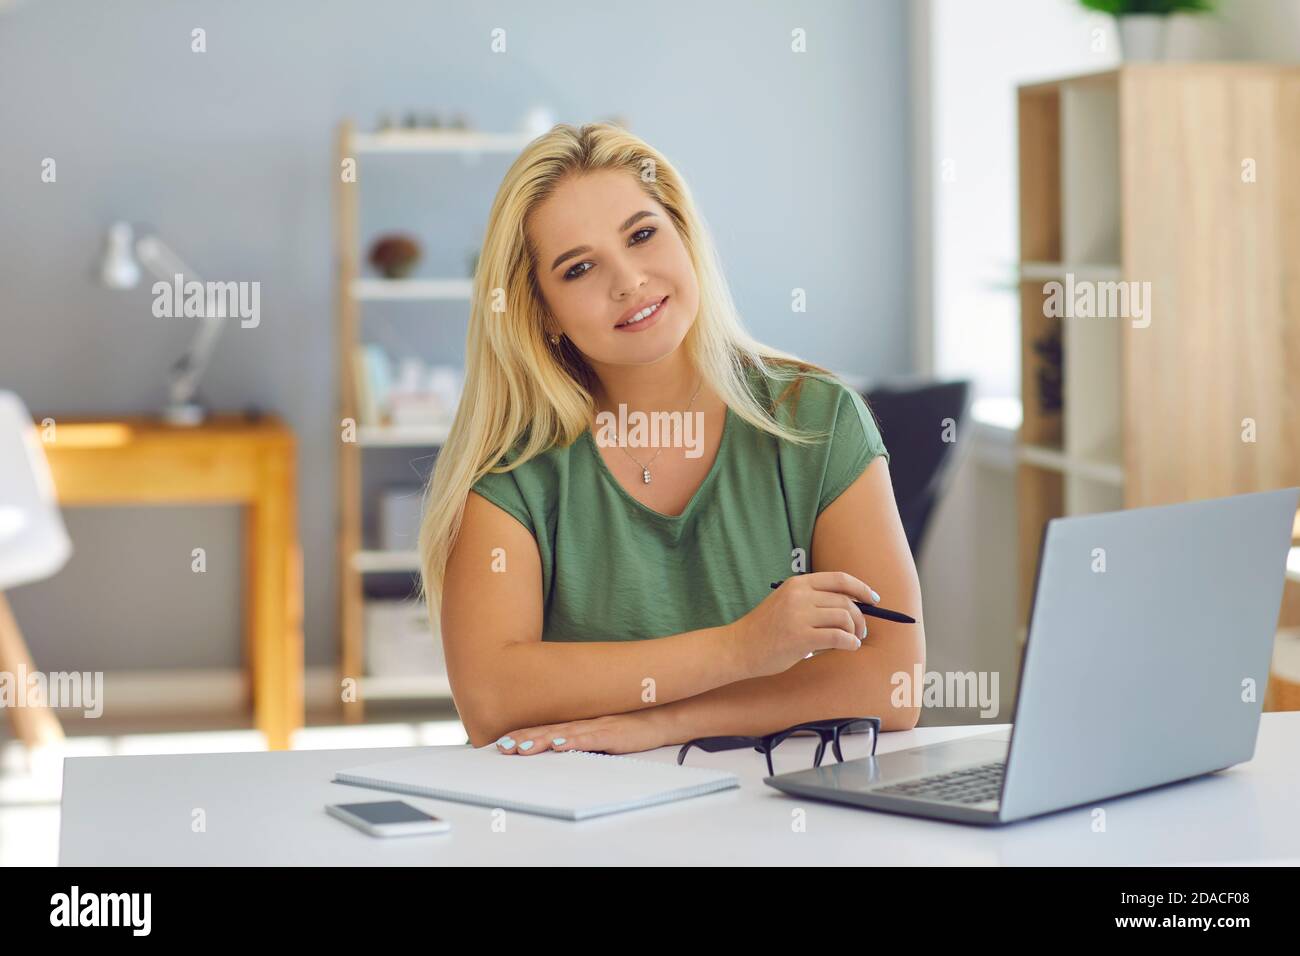 Smiling woman working online with notebook and looking at camera at home or modern office Stock Photo